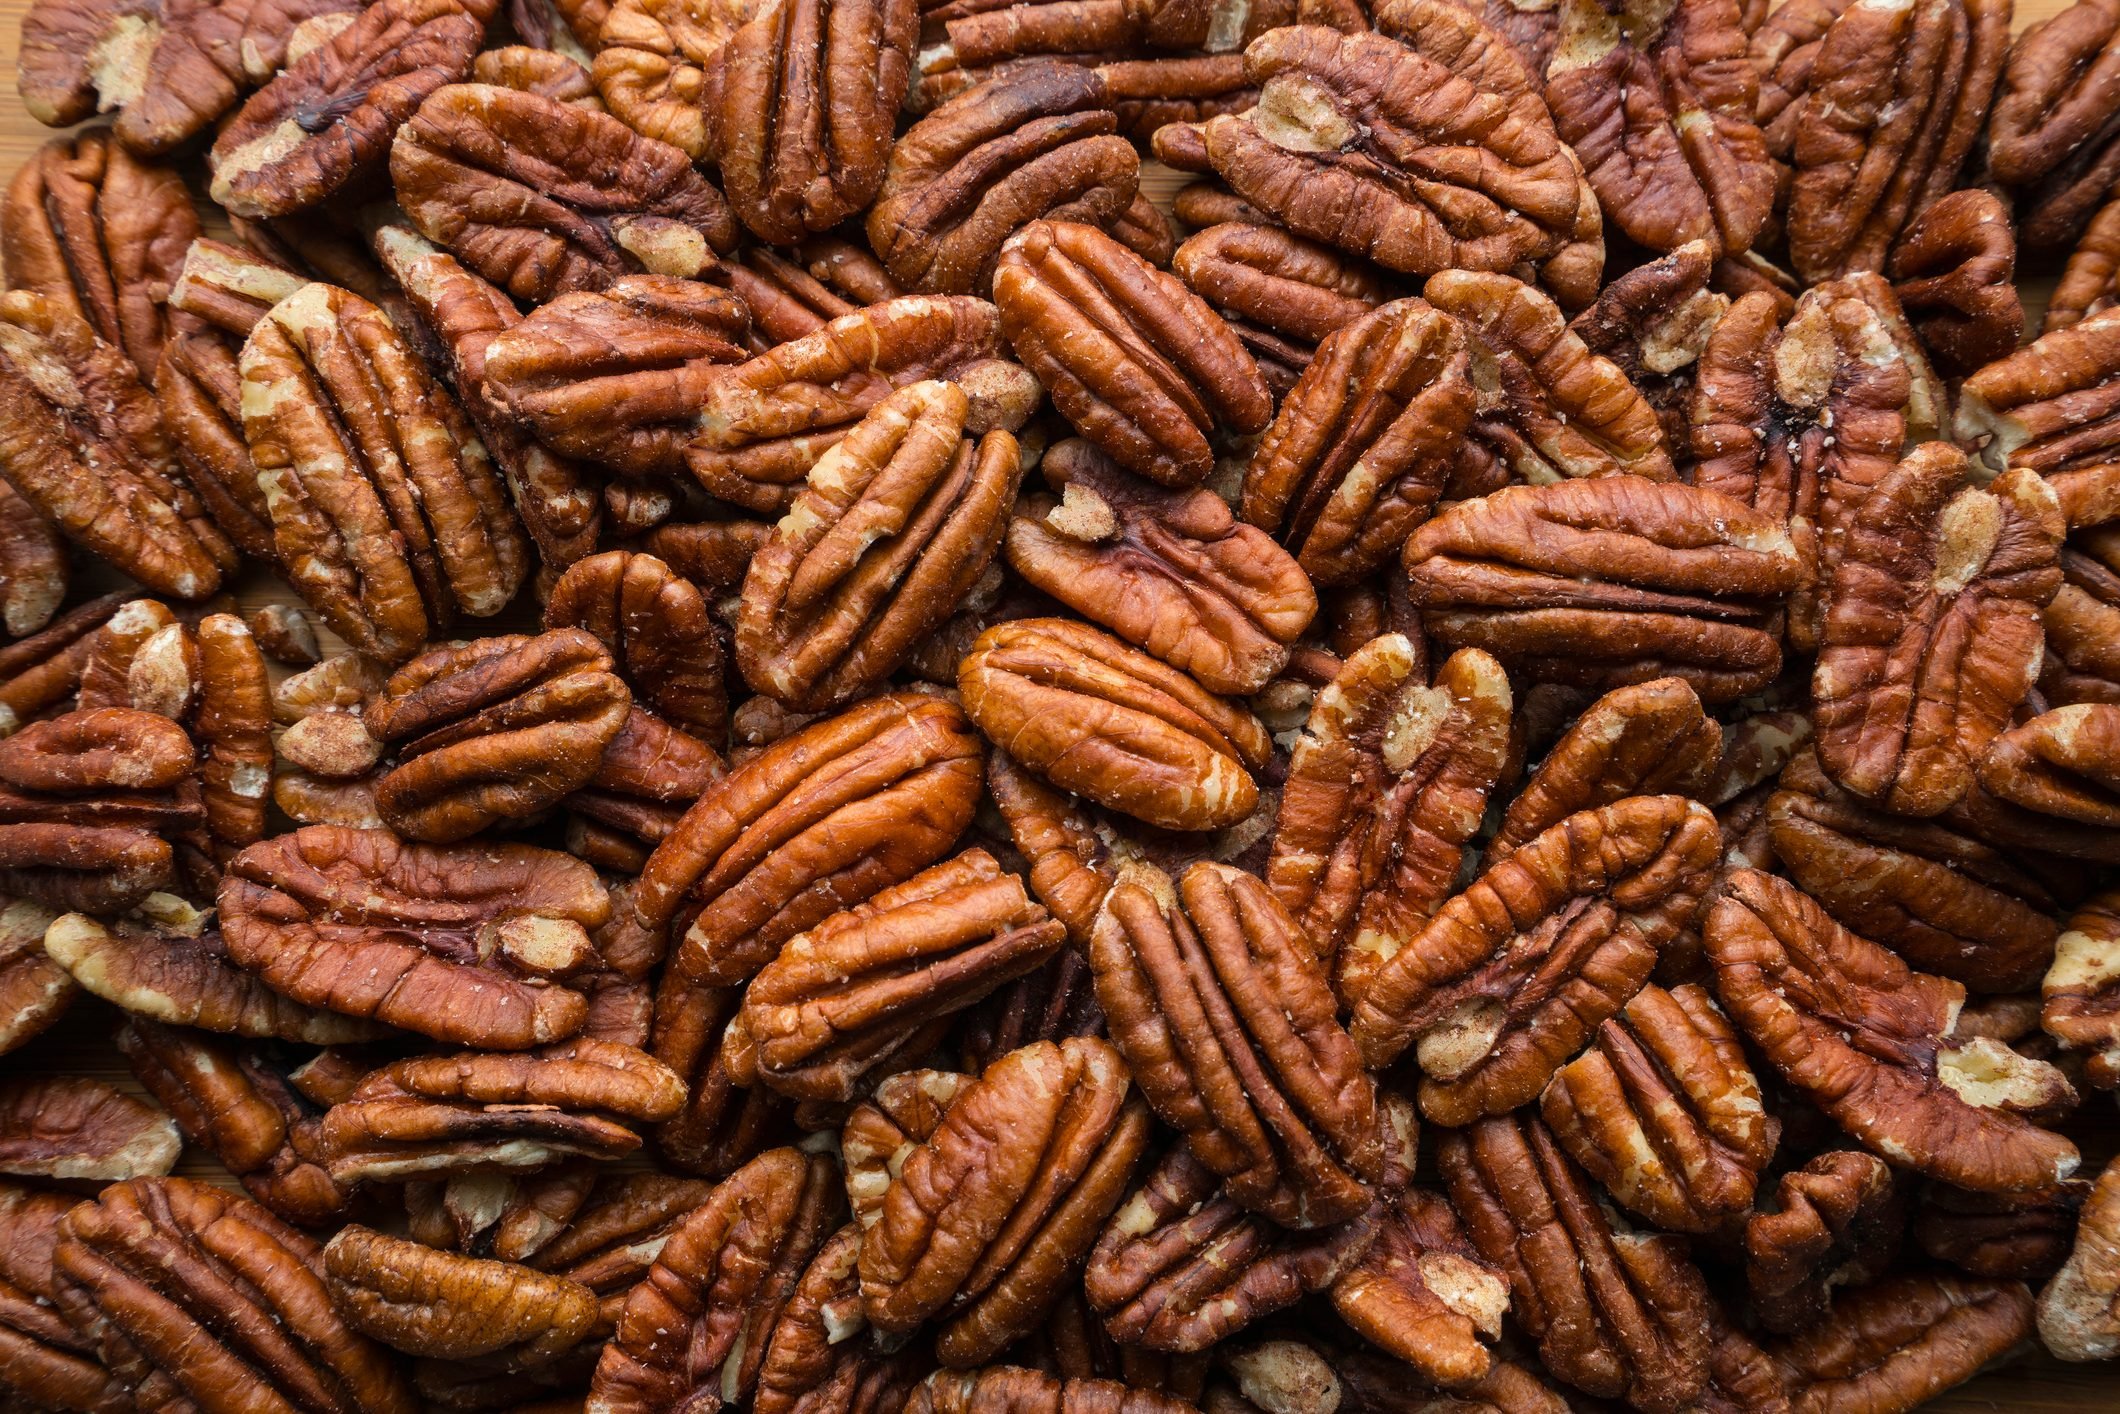 Are Pecans Good for You? Here's What Nutritionists Say